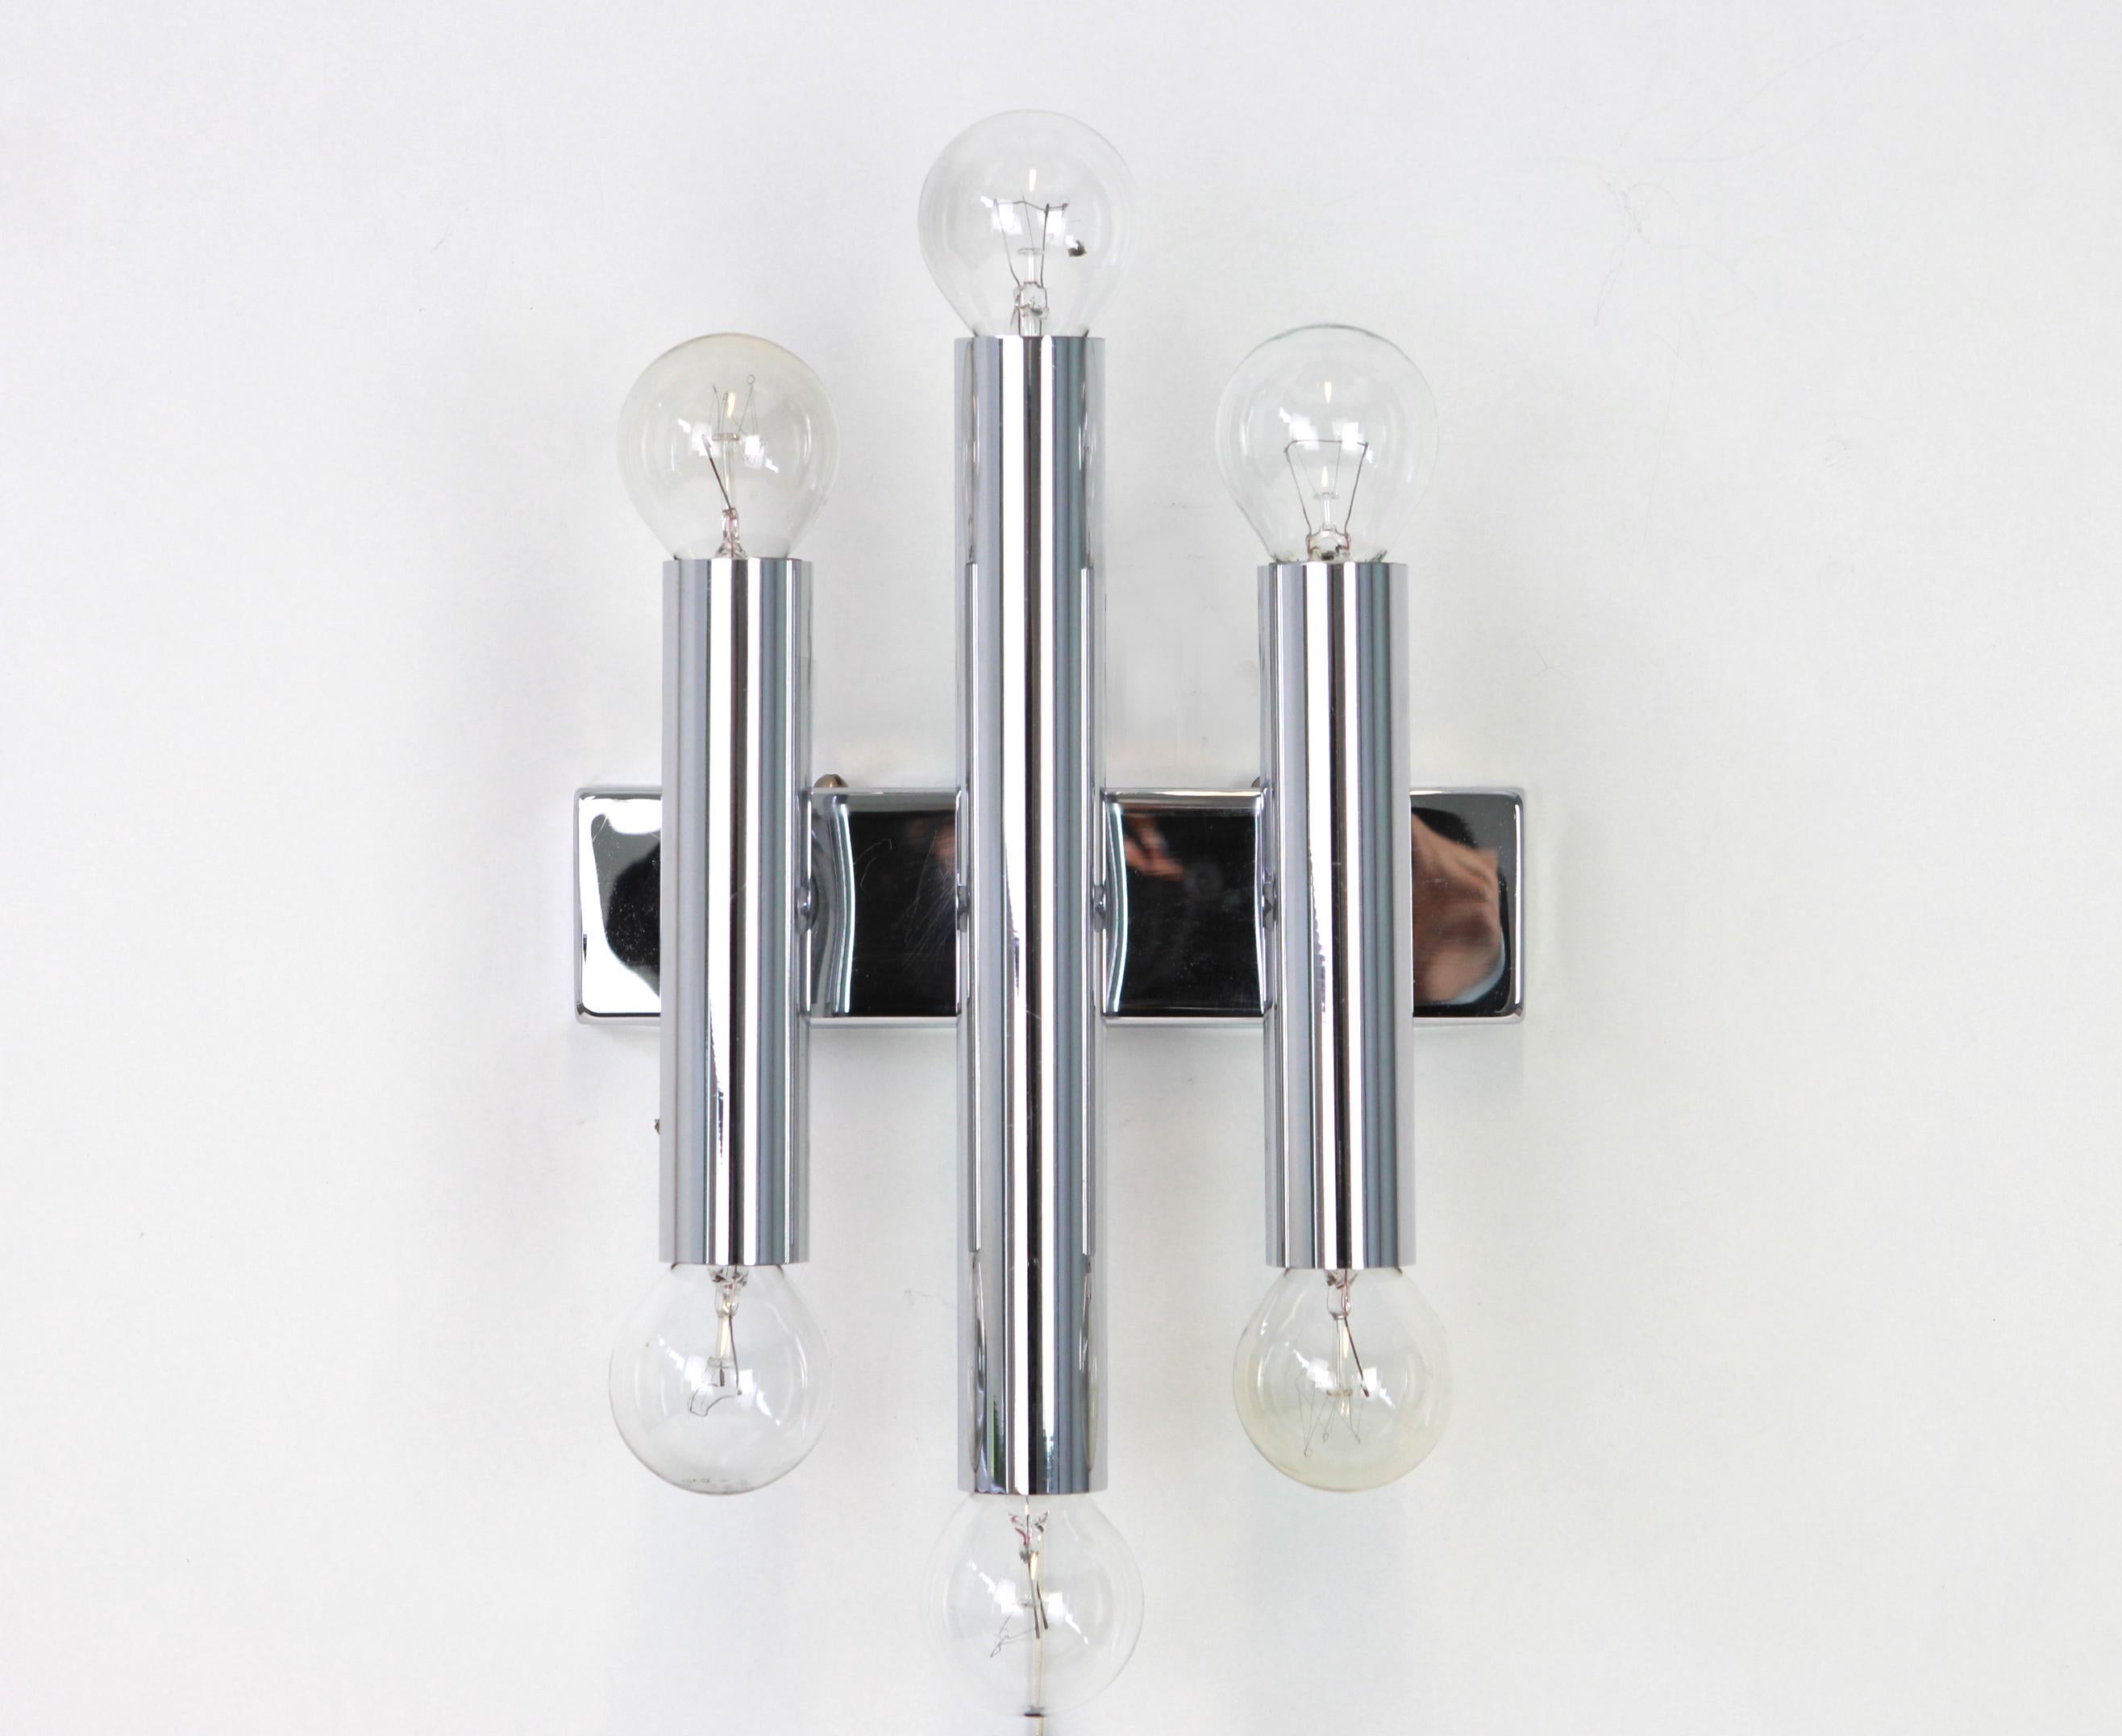 Pair of Italian chrome wall sconces Sciolari style, 1970s
each wall light takes 6 x E14 small bulbs.
Dimensions:
Height: 23 cm
Width 20 cm
Depth 10 cm
Good condition.
Please note that the listed price is for one pair.
2 Pairs are available.
  